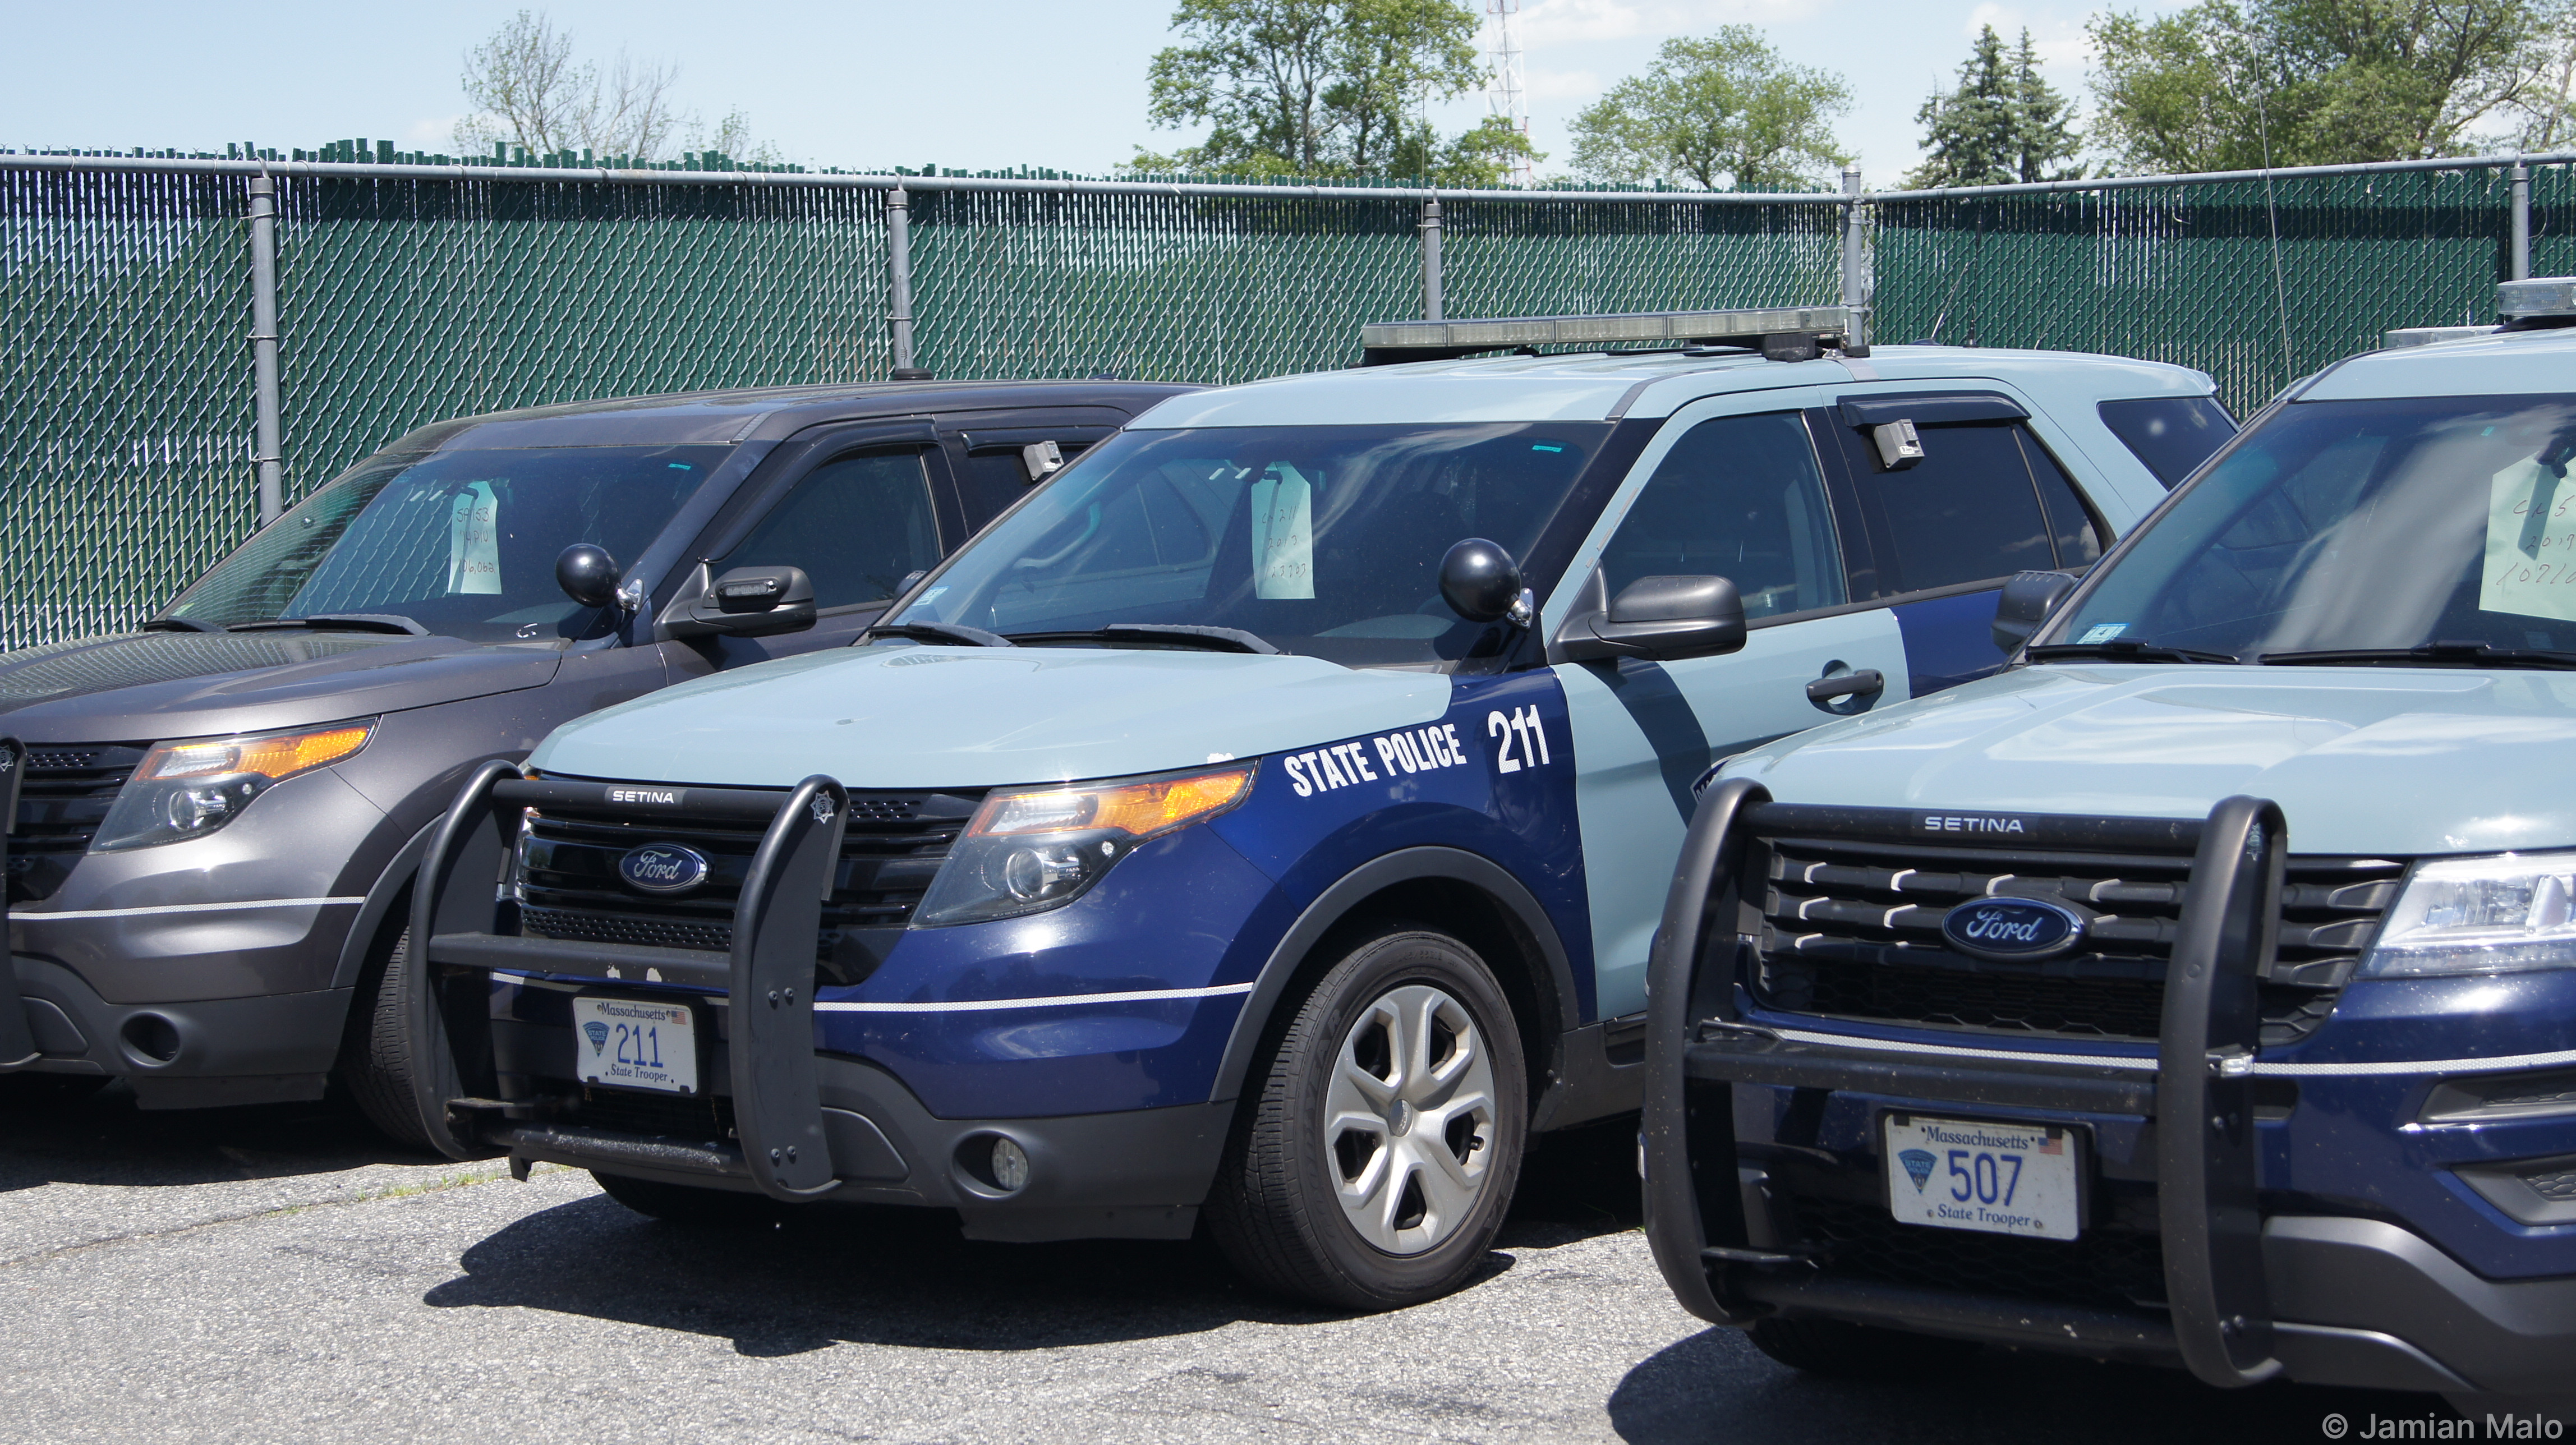 A photo  of Massachusetts State Police
            Cruiser 211, a 2013-2014 Ford Police Interceptor Utility             taken by Jamian Malo